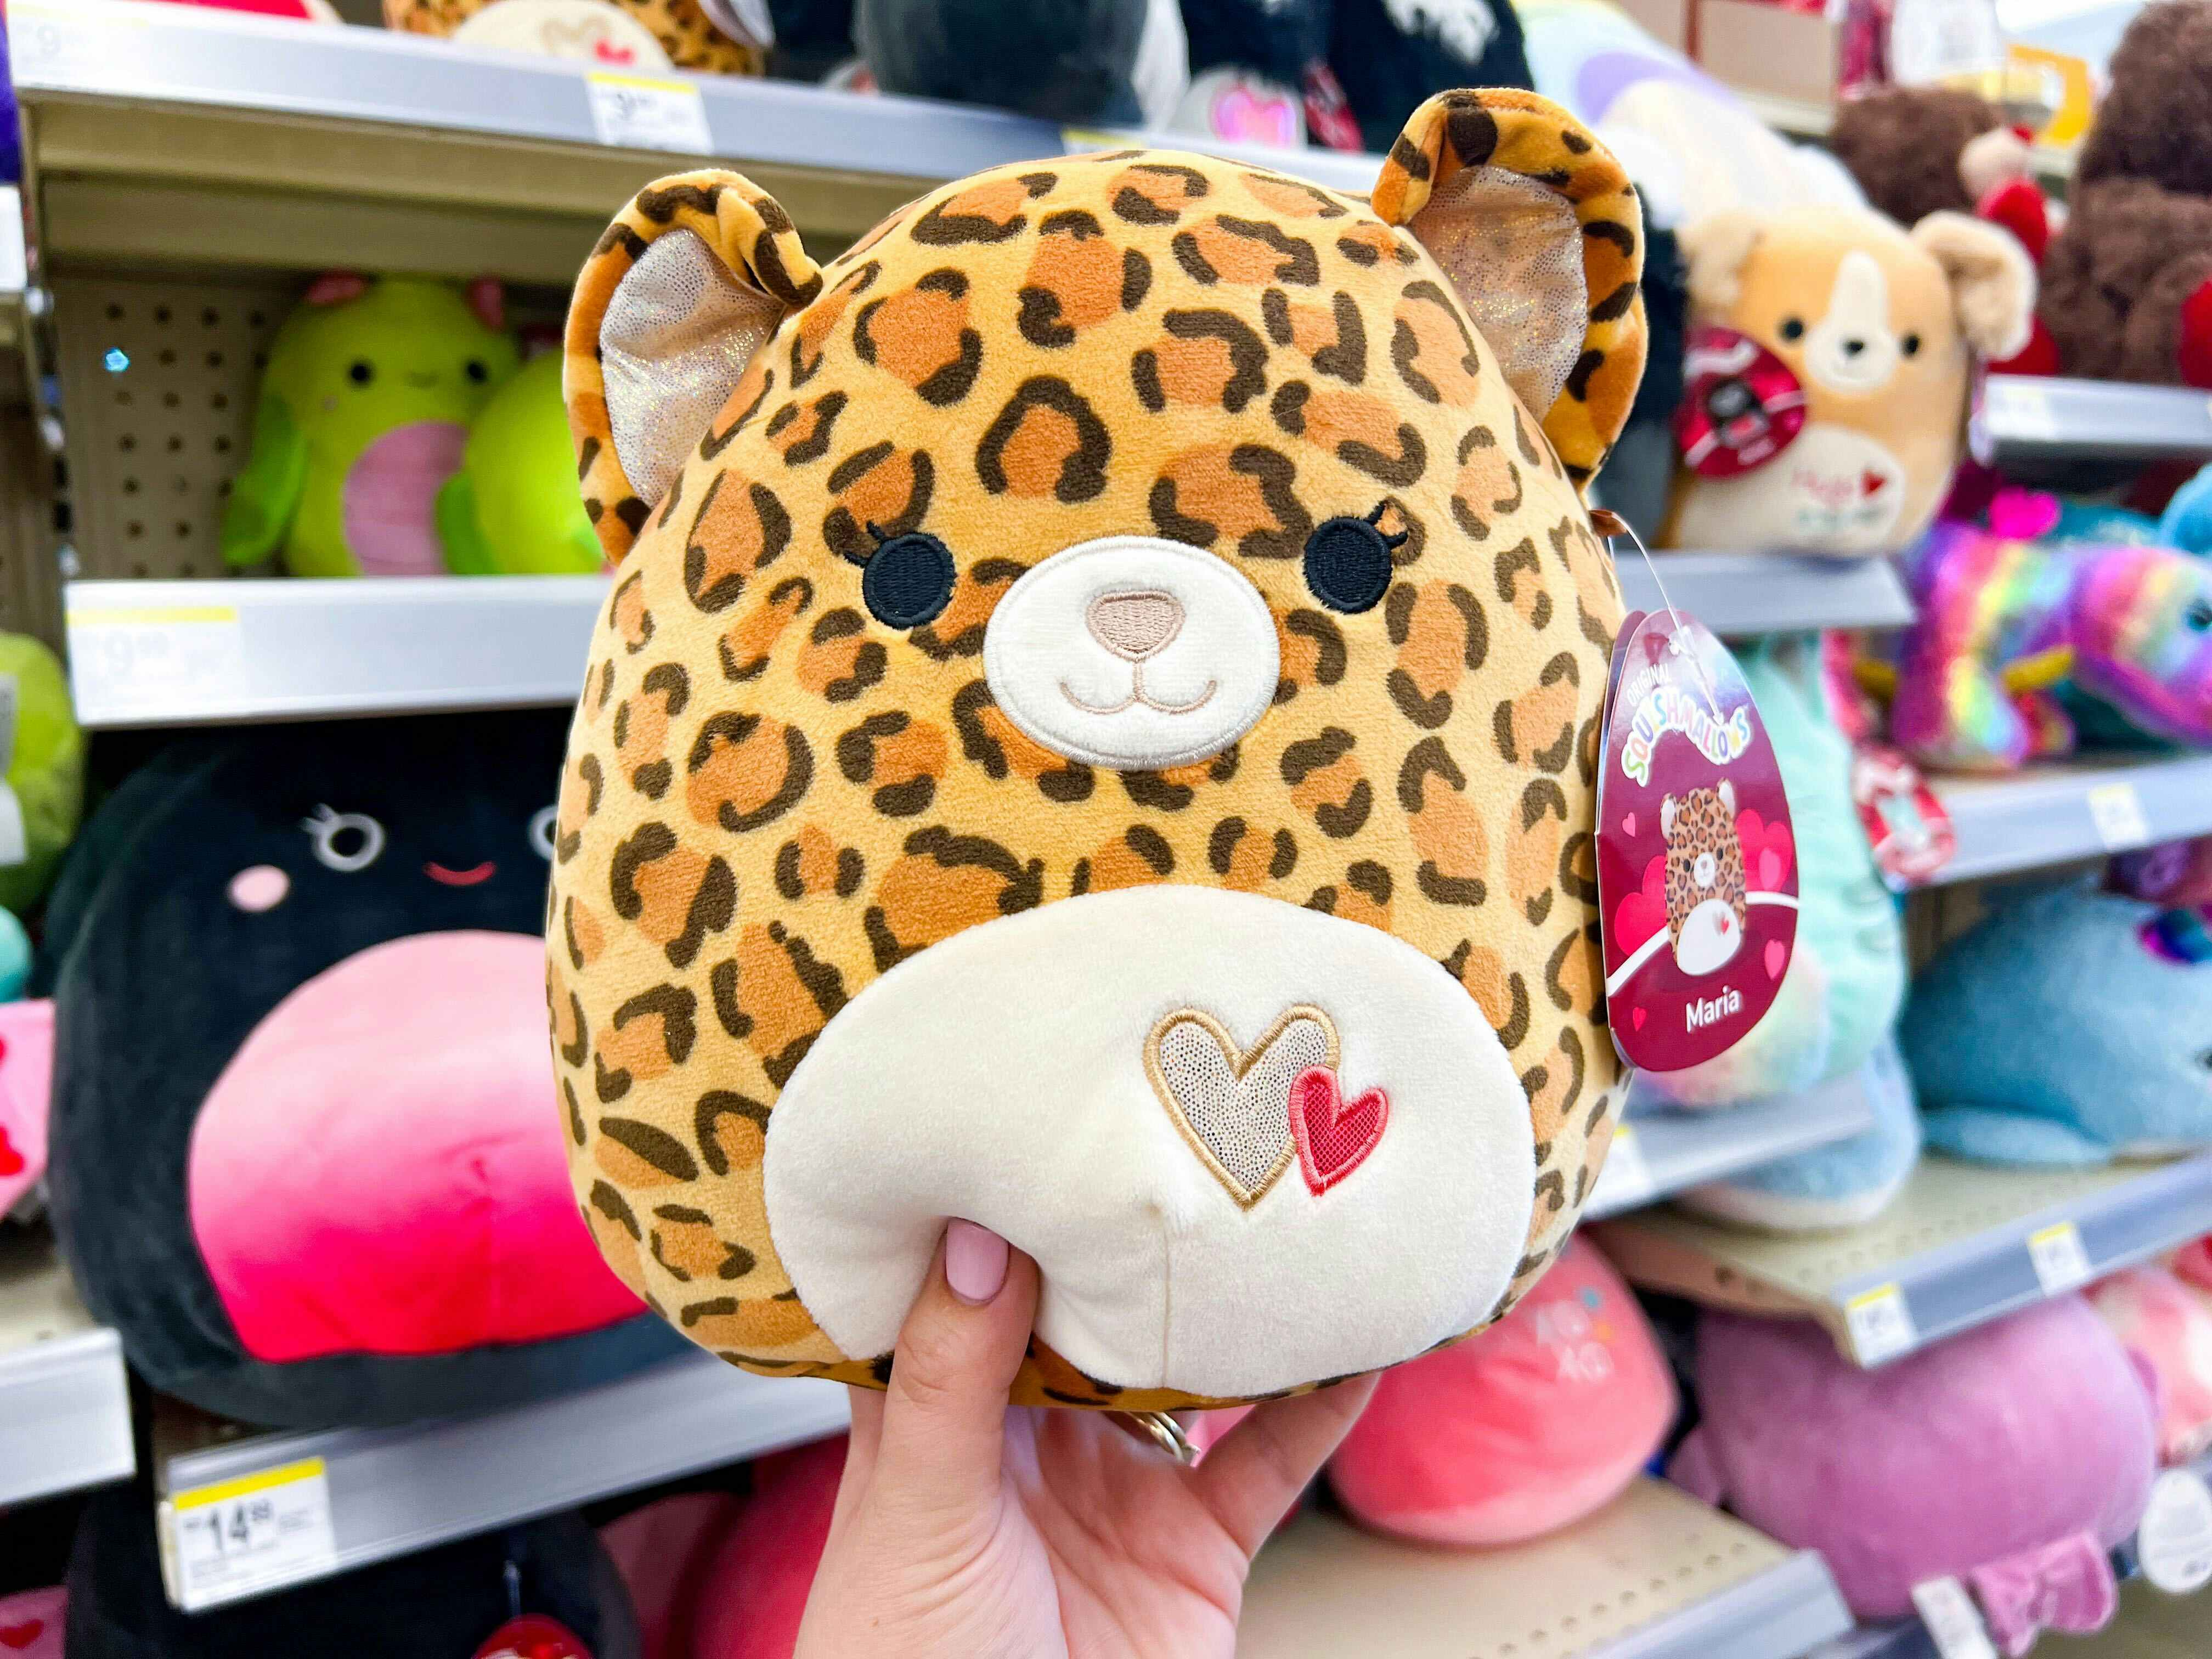 Someone holding up a Maria Valentine's Day Squishmallow in Walgreens